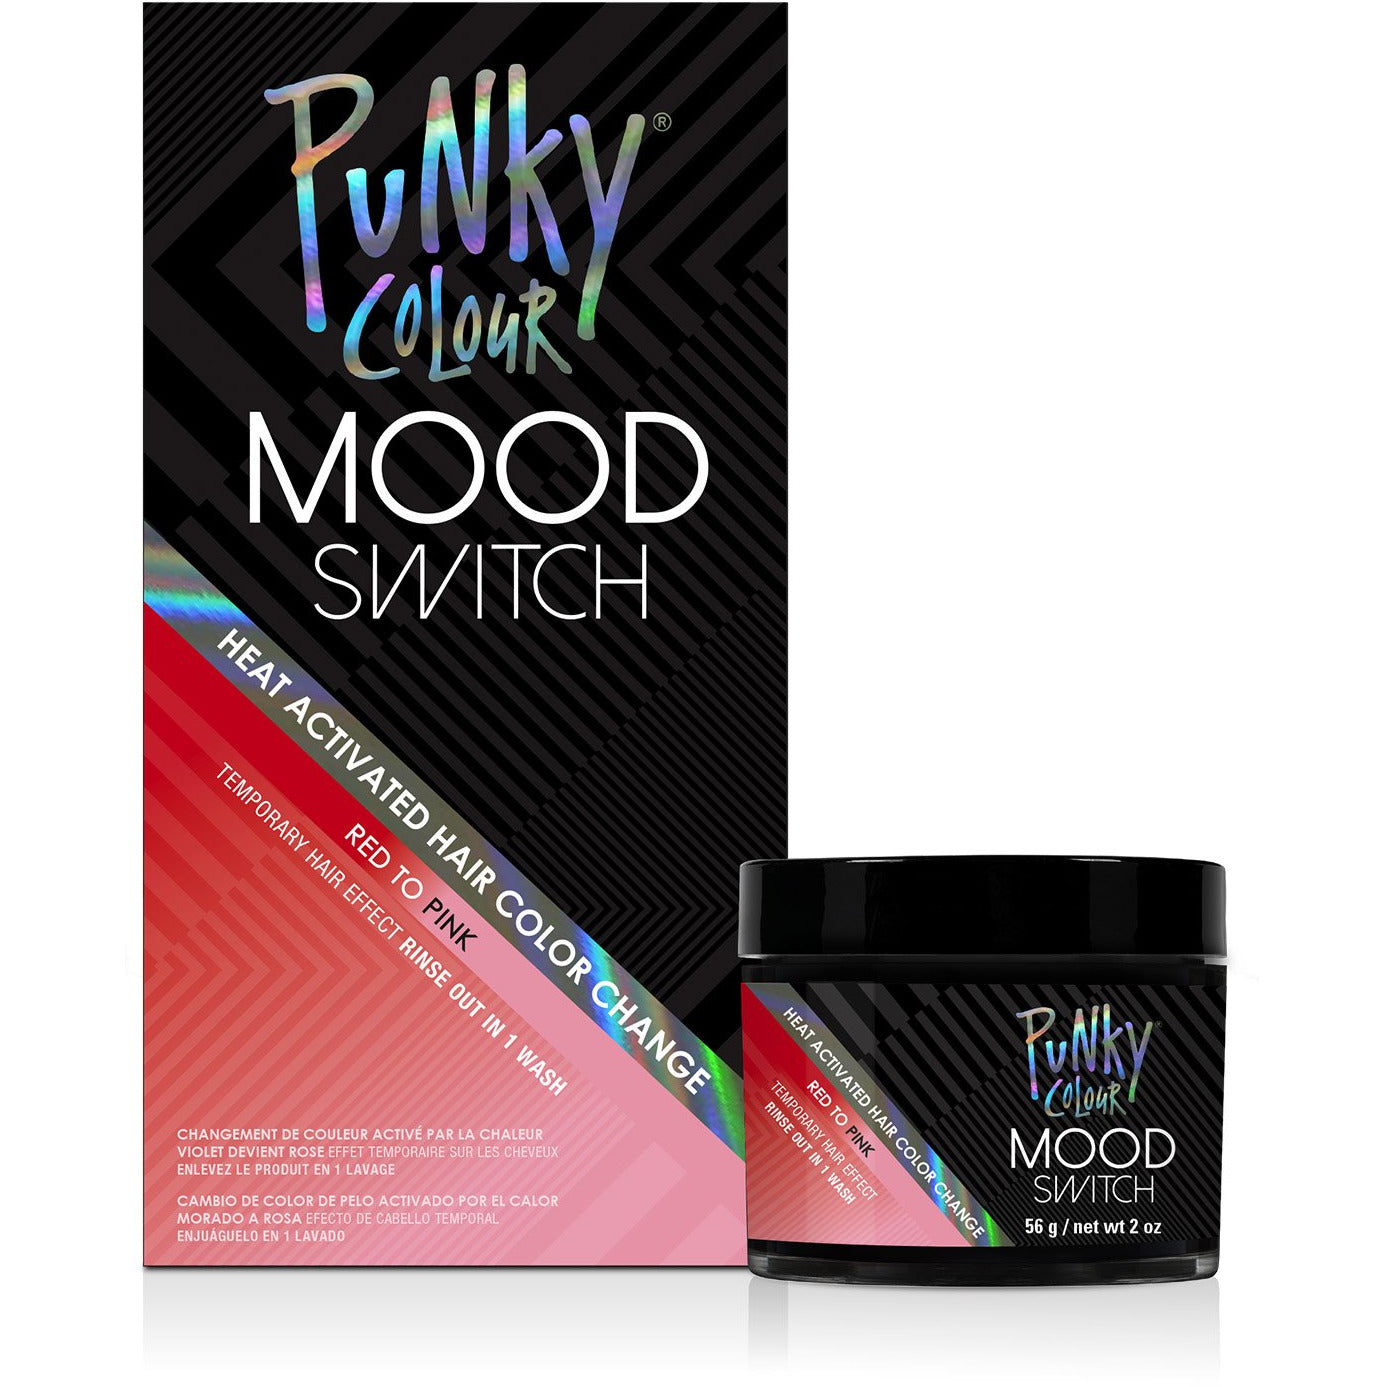 Punky Colour Mood Switch Heat Activated Hair Color, Red to Pink